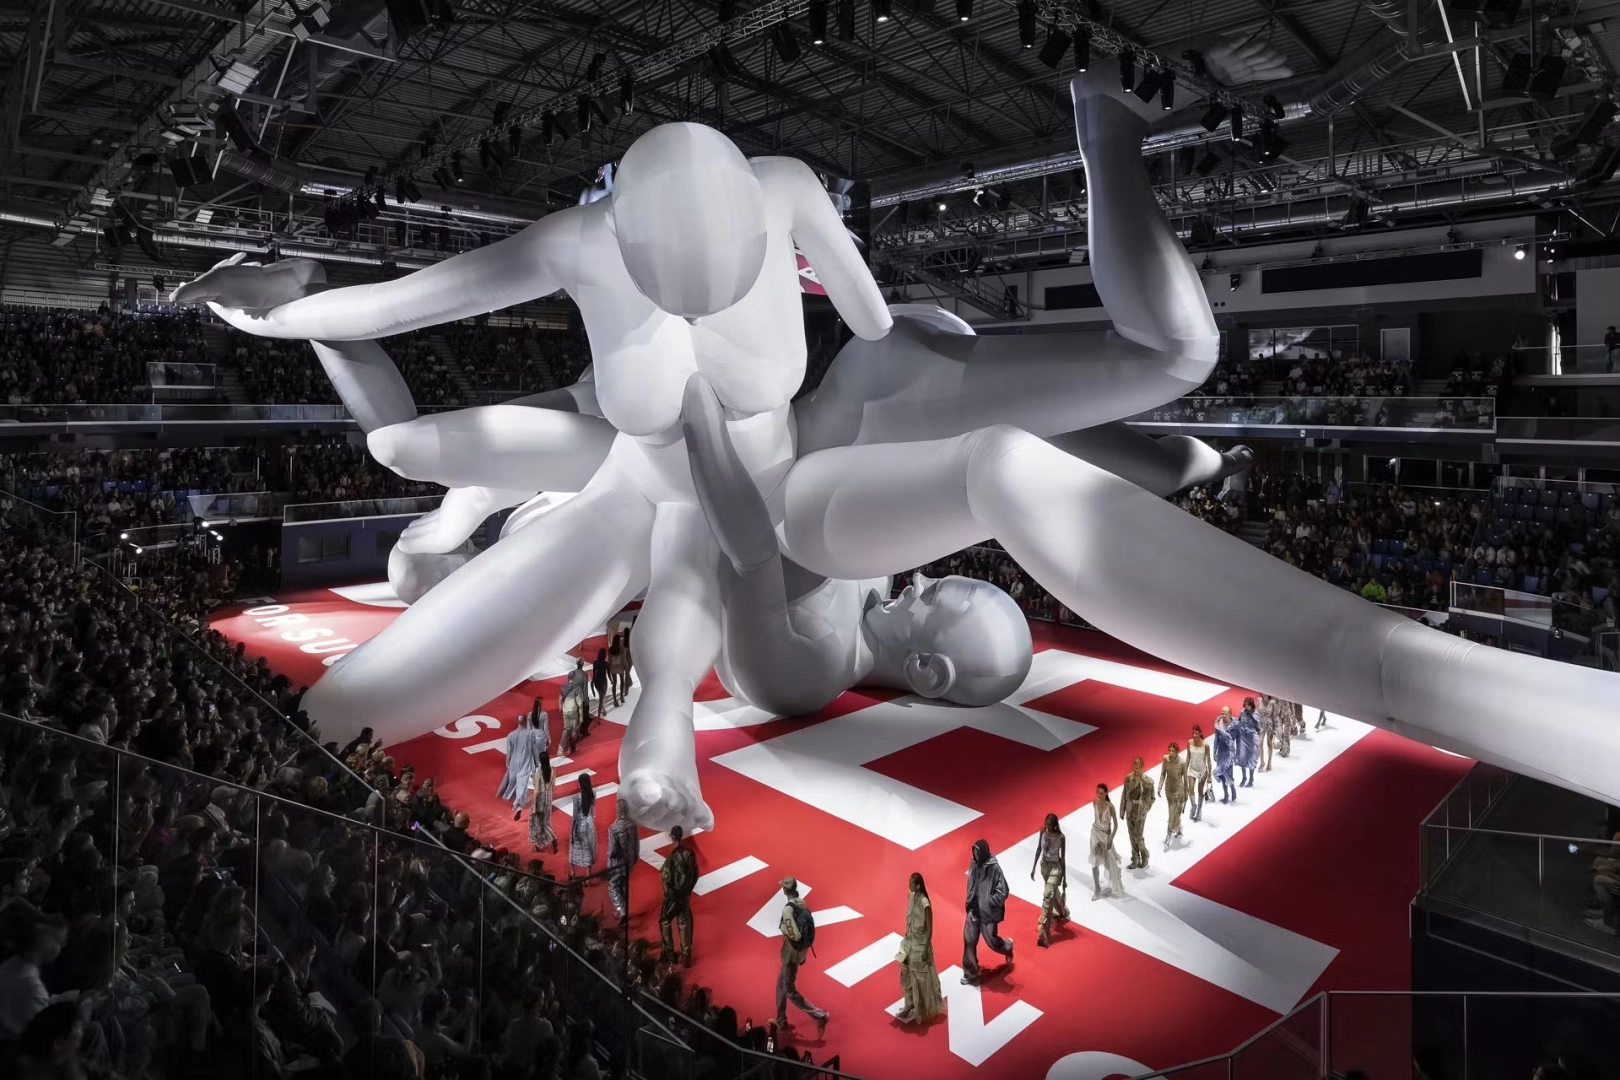 Inflatable sculptures float in the air during fashion weeks and sporting events